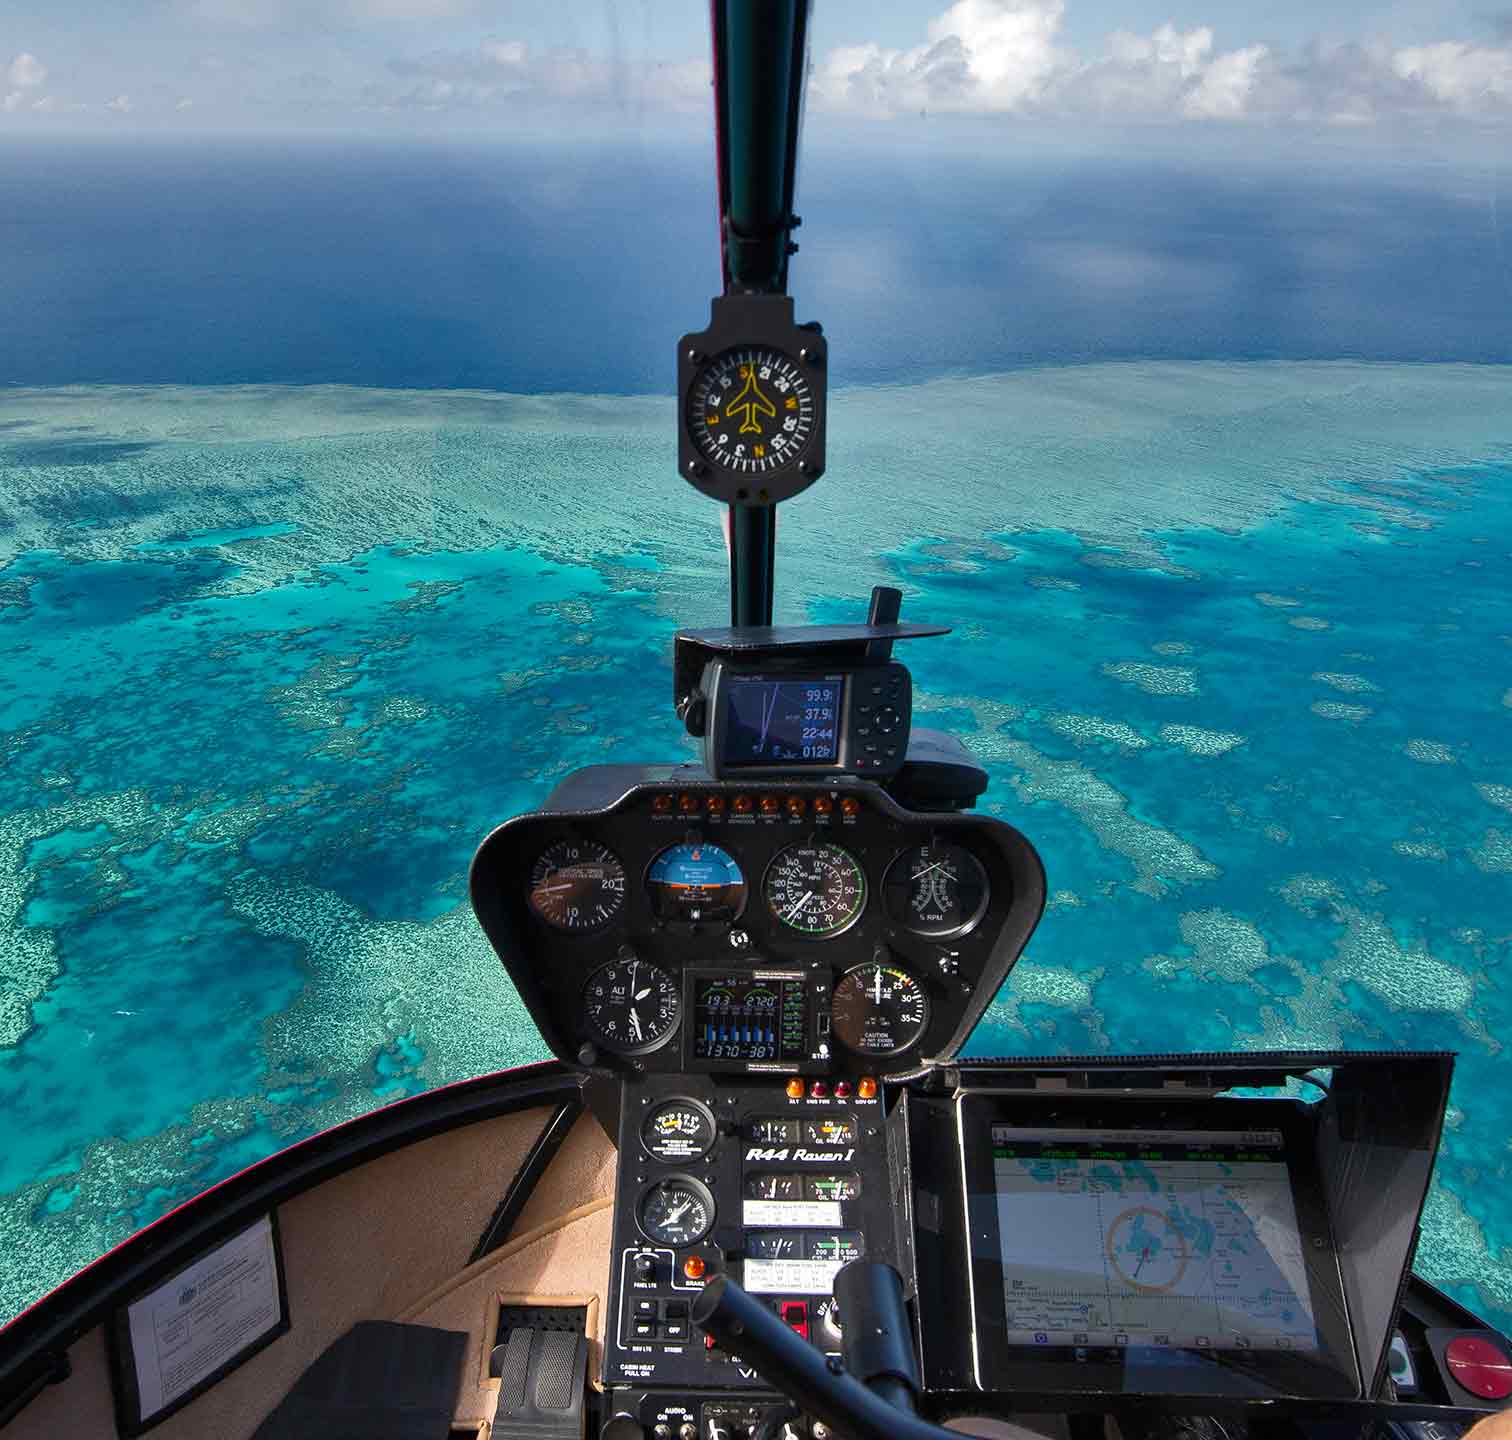 the cockpit of a plane flying over the ocean.